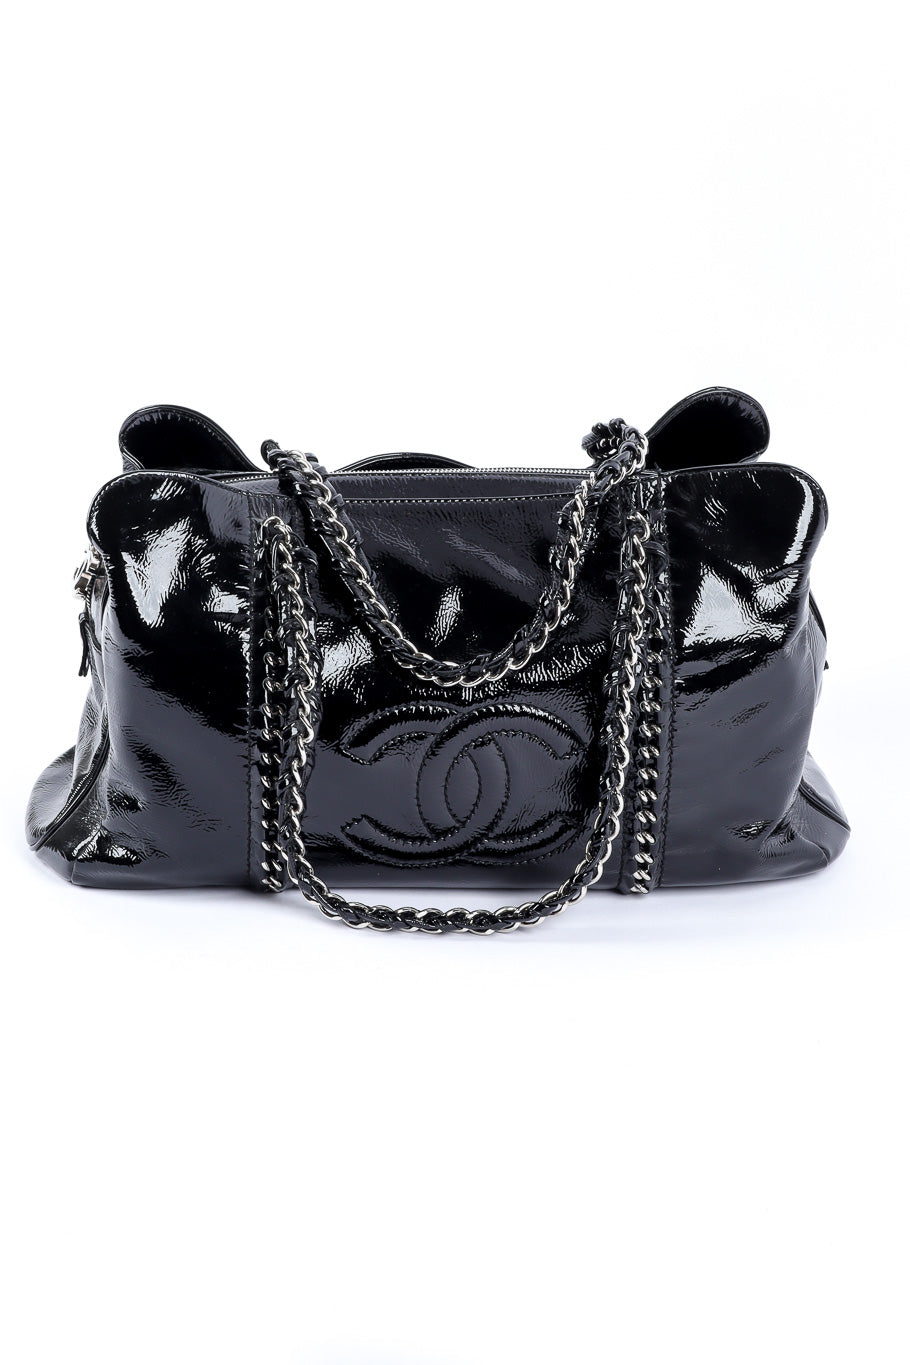 Chanel Patent Leather Luxe Ligne Accordion Flap Bag